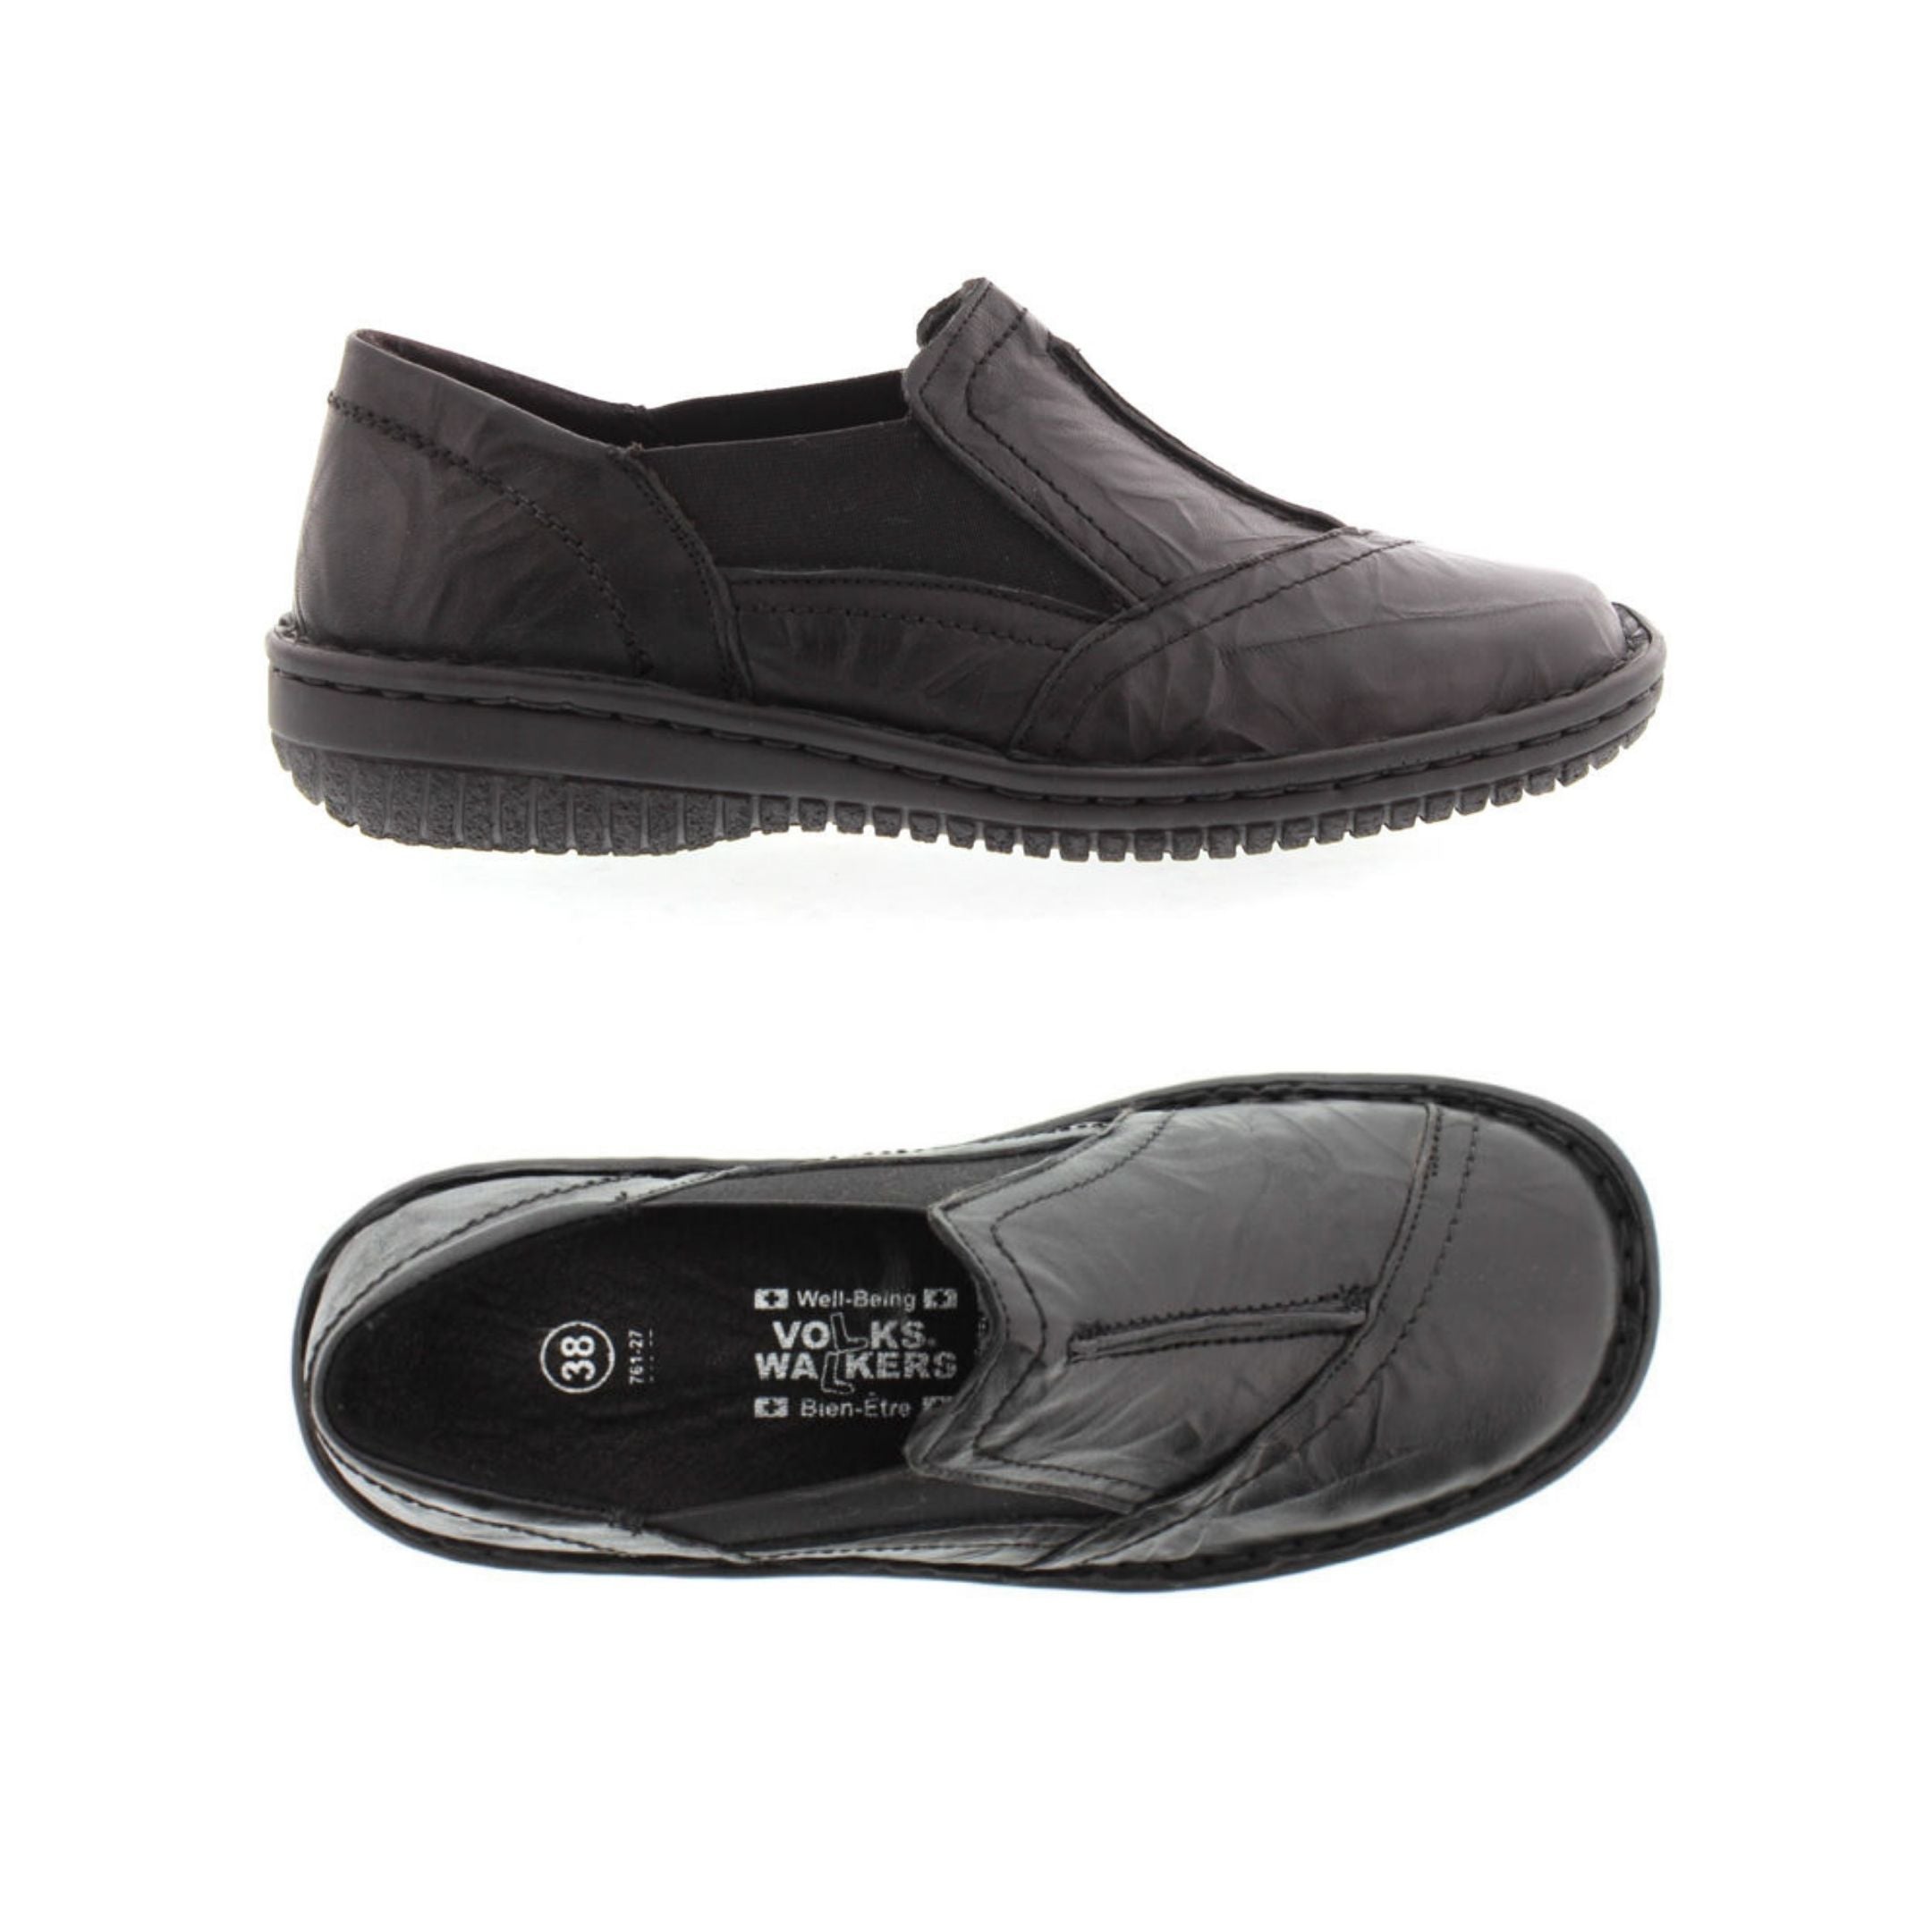 Top and side view Black slip on shoe with side elastic and detail stitching with thick stitched outsole